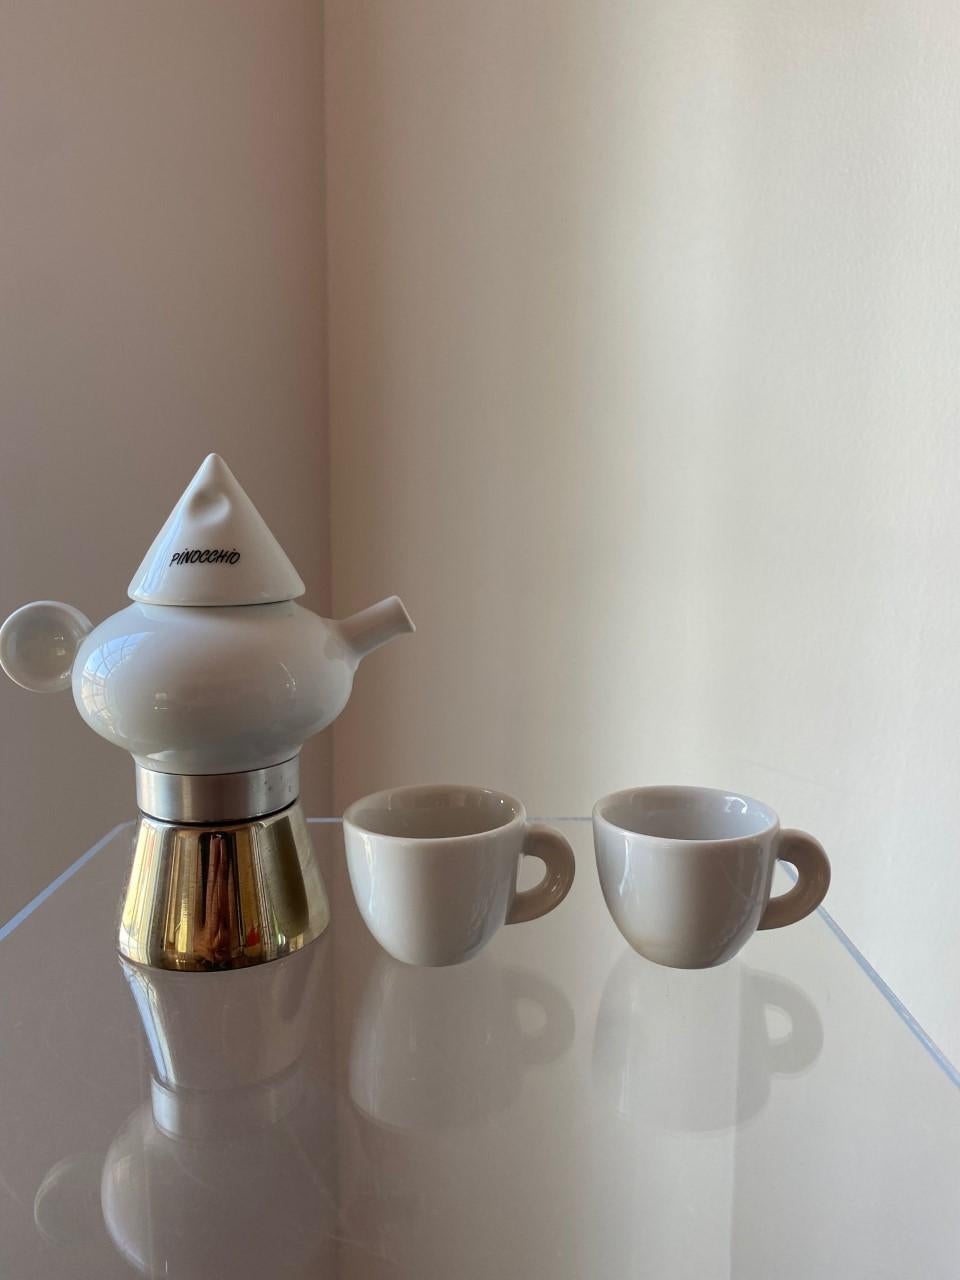 Rare Steel and Ceramic Espresso Coffee Maker and Cups by La Porcellane, Italy In Good Condition For Sale In San Diego, CA